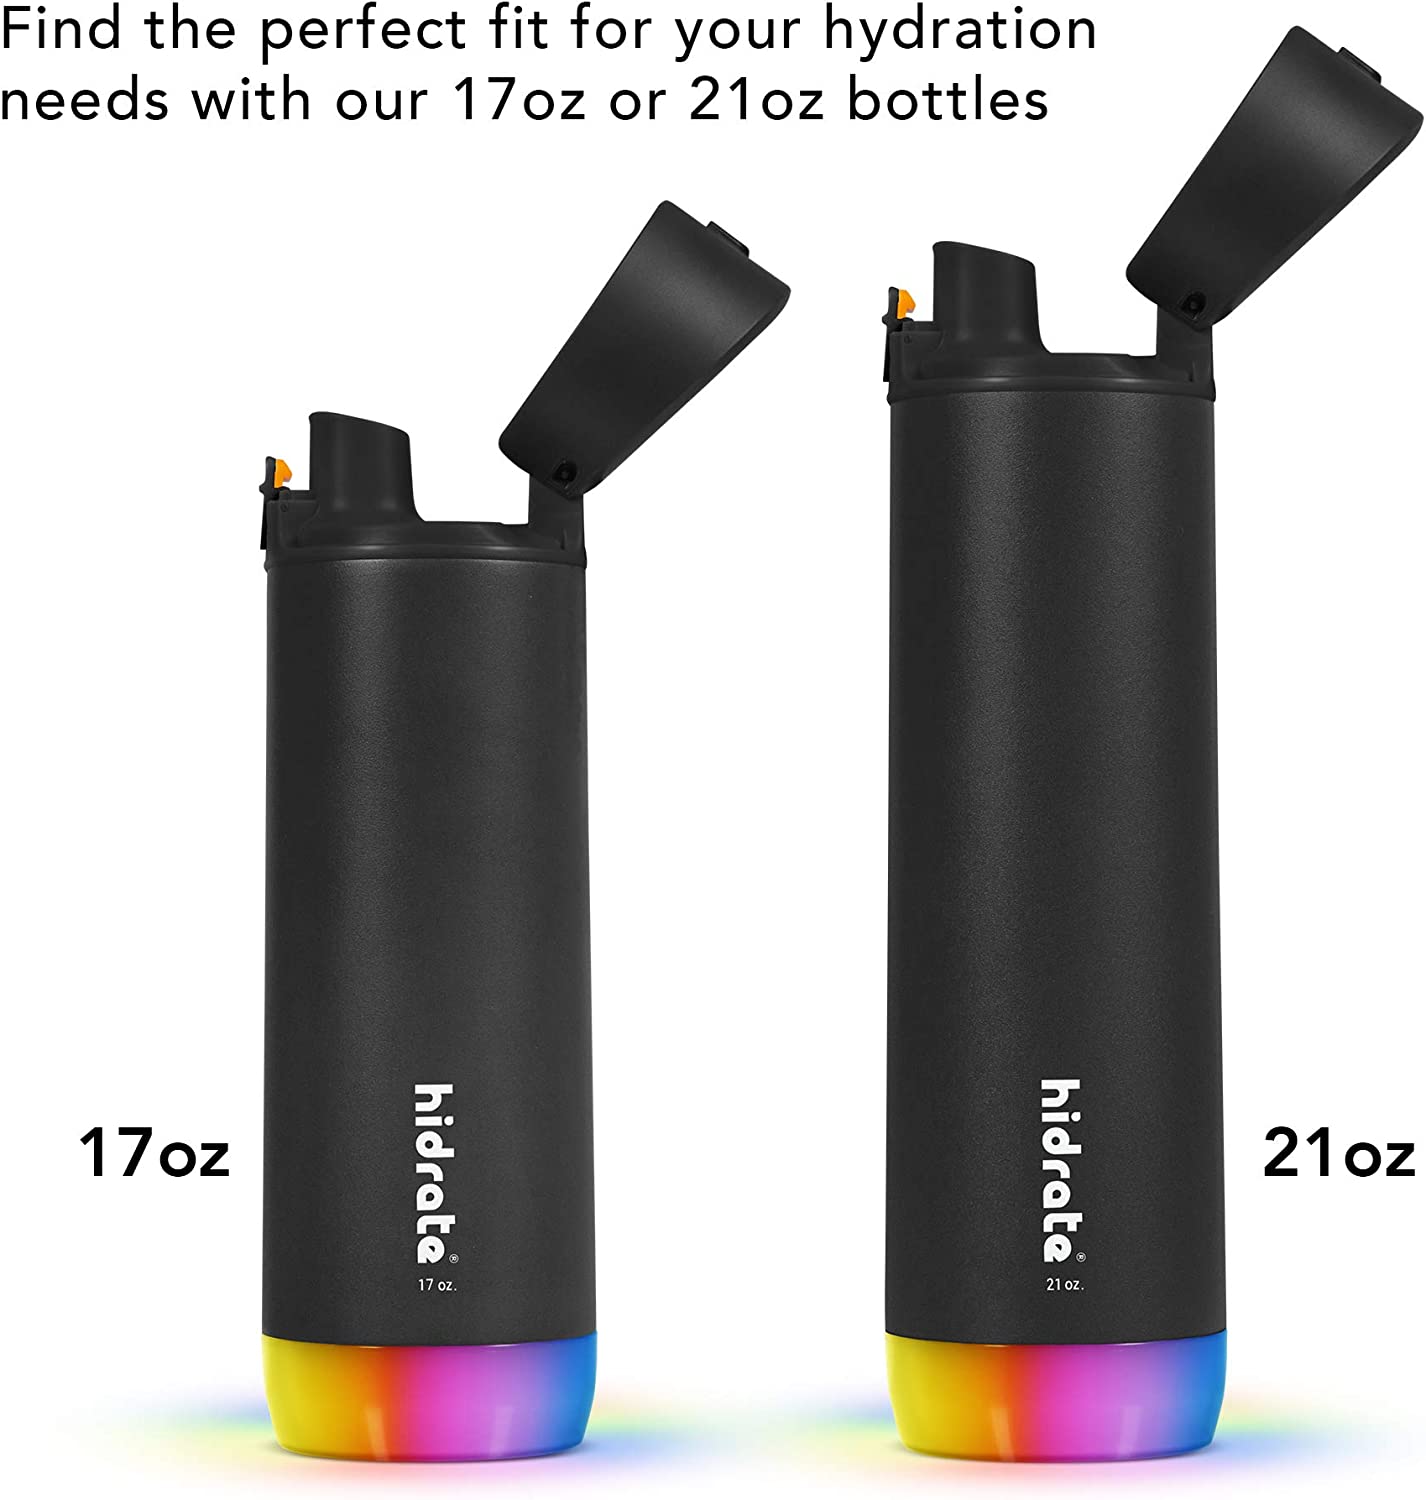 Two black Hidrate smart water bottles, one small and one large. The text reads, "Find the perfect fit for your hydration needs with our 17oz or 21oz bottles".